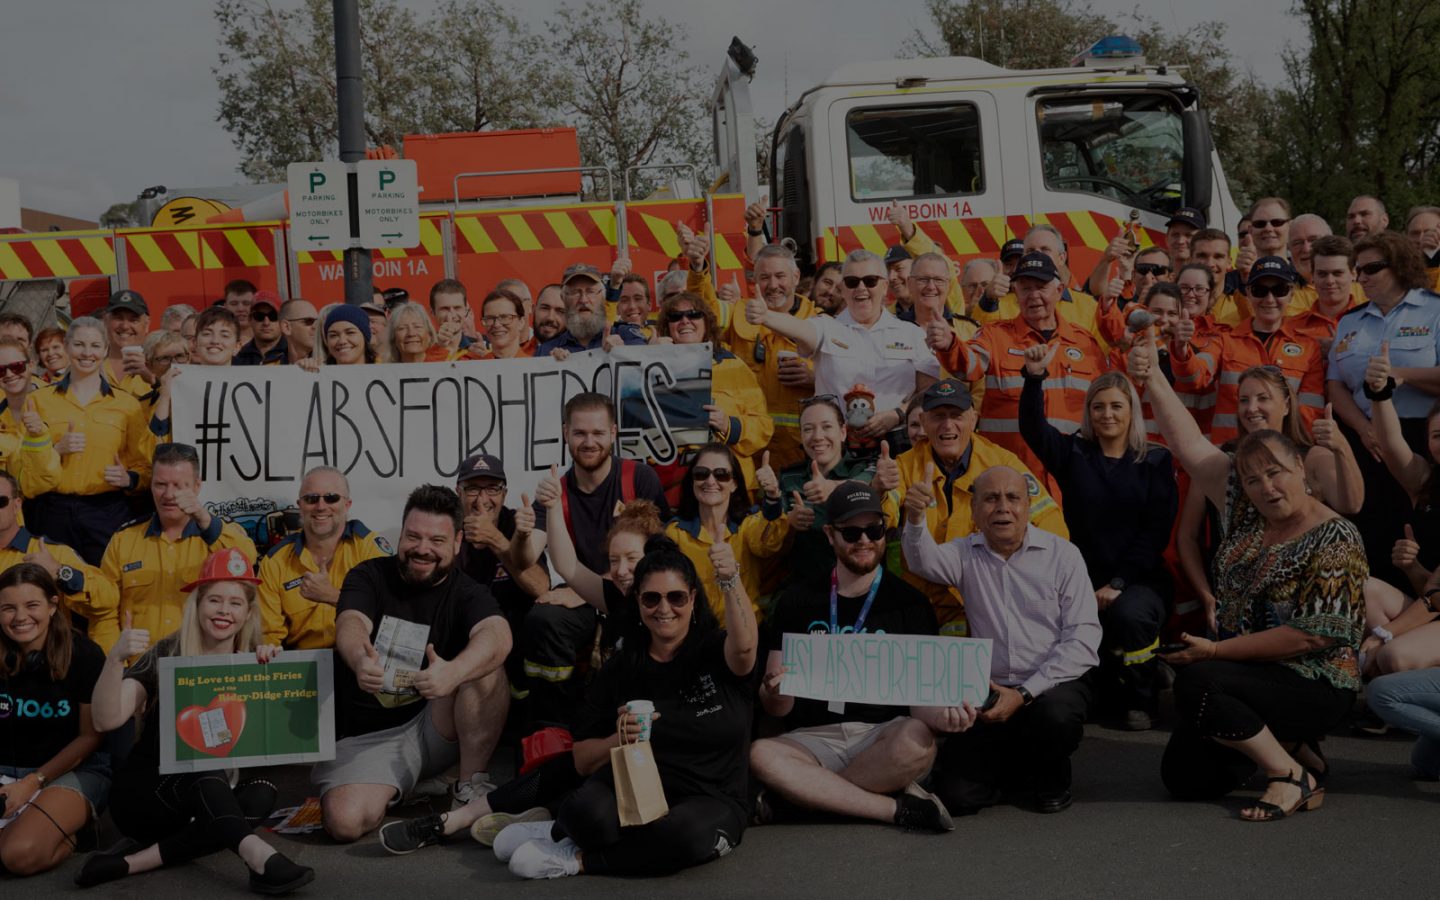 A large group of people, mainly dressed in volunteer firefighting uniforms, in front of a Wamboin rural fire truck.